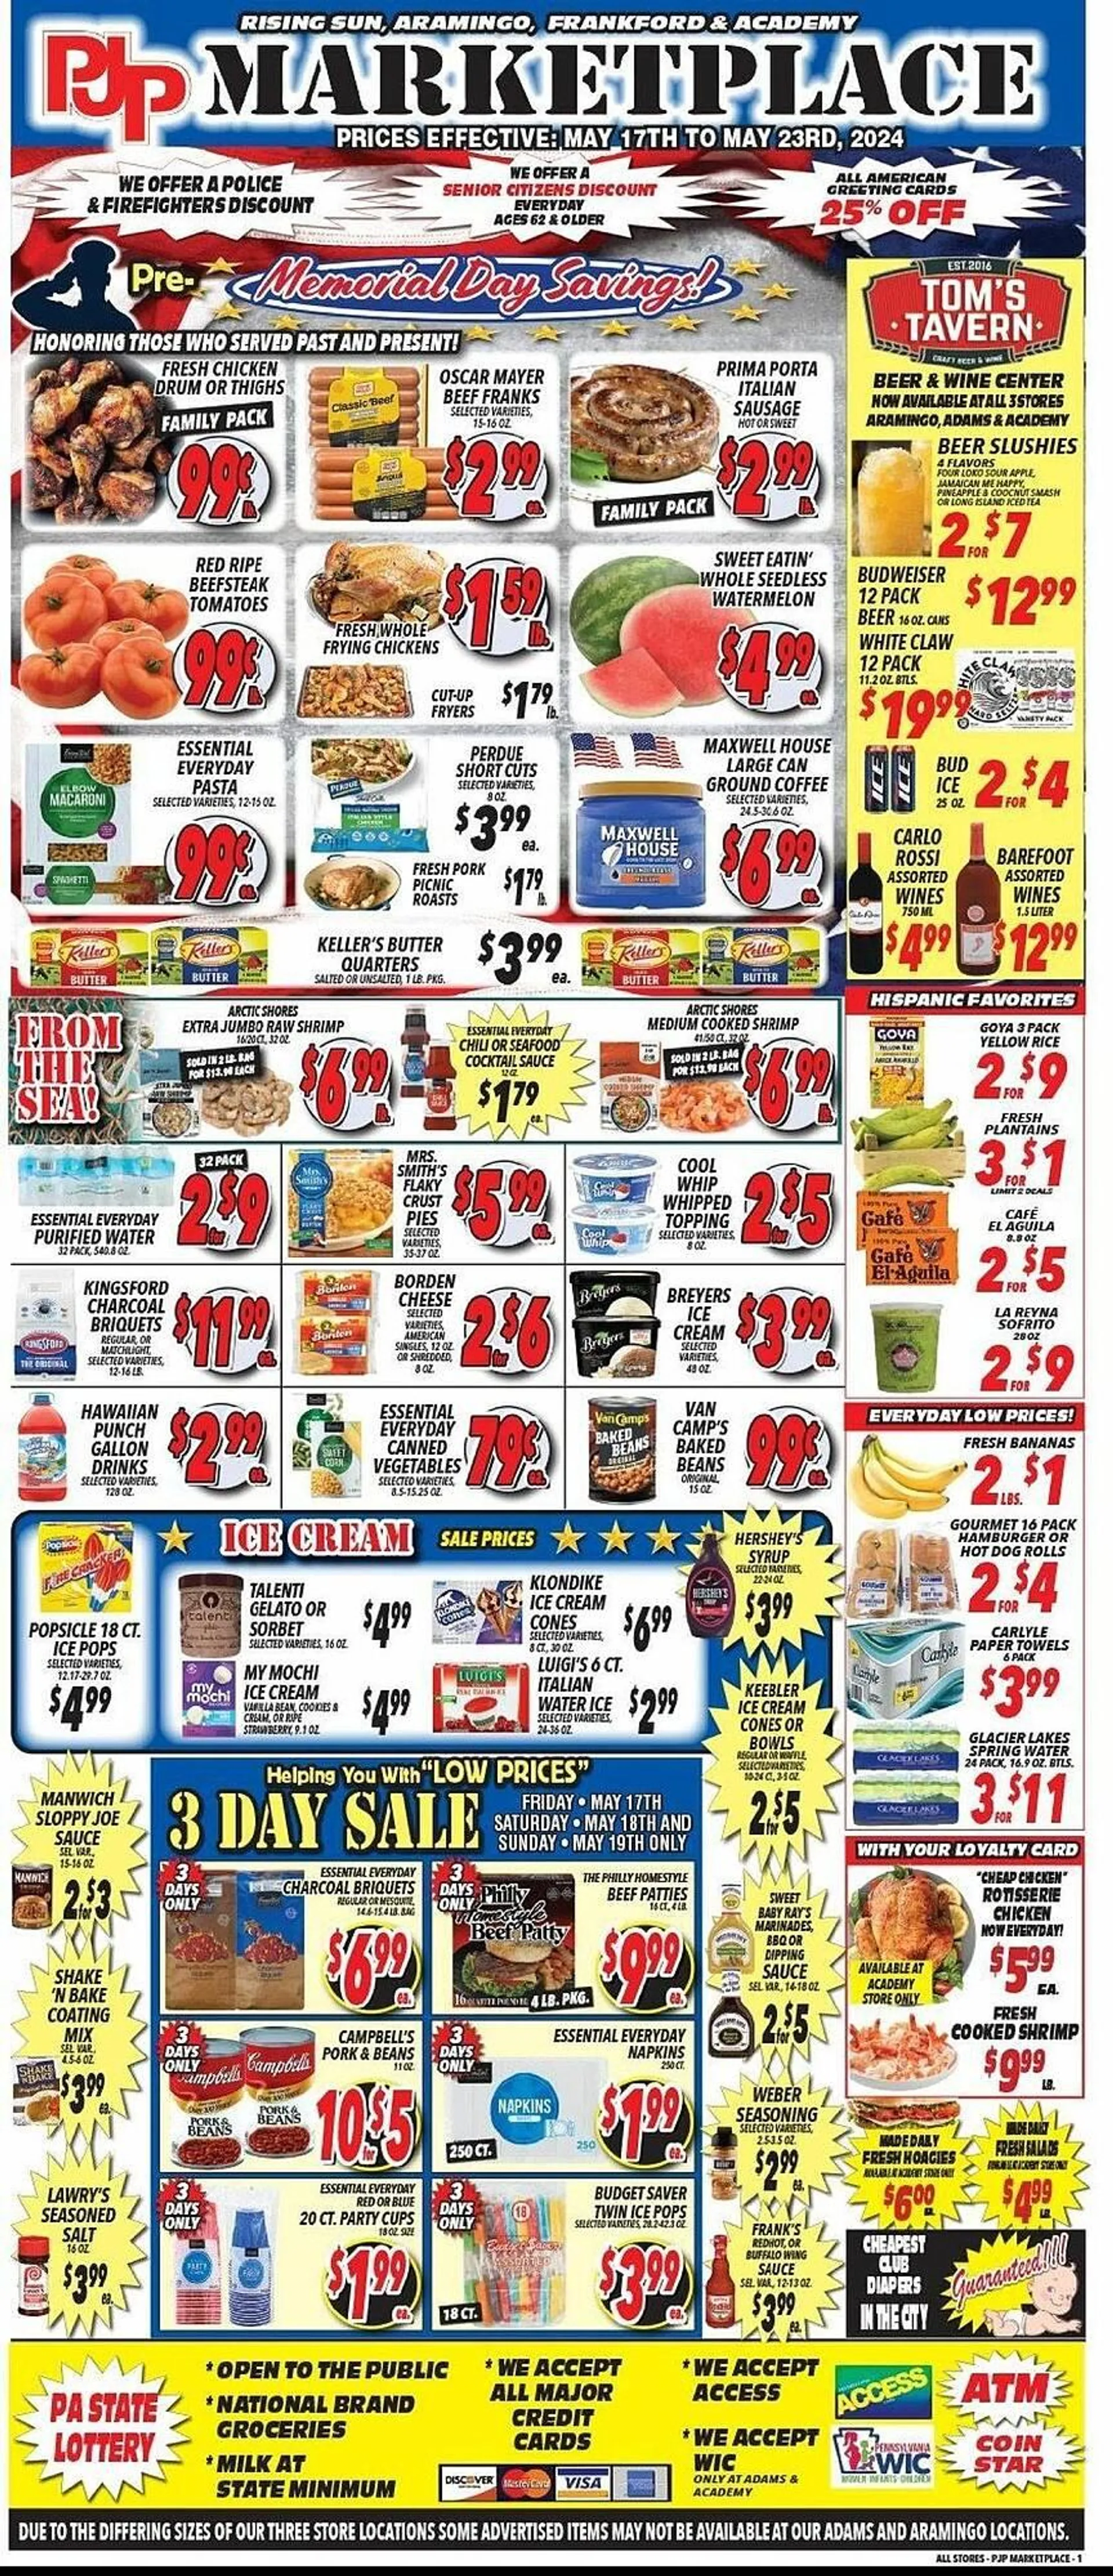 PJP Marketplace Weekly Ad - 1